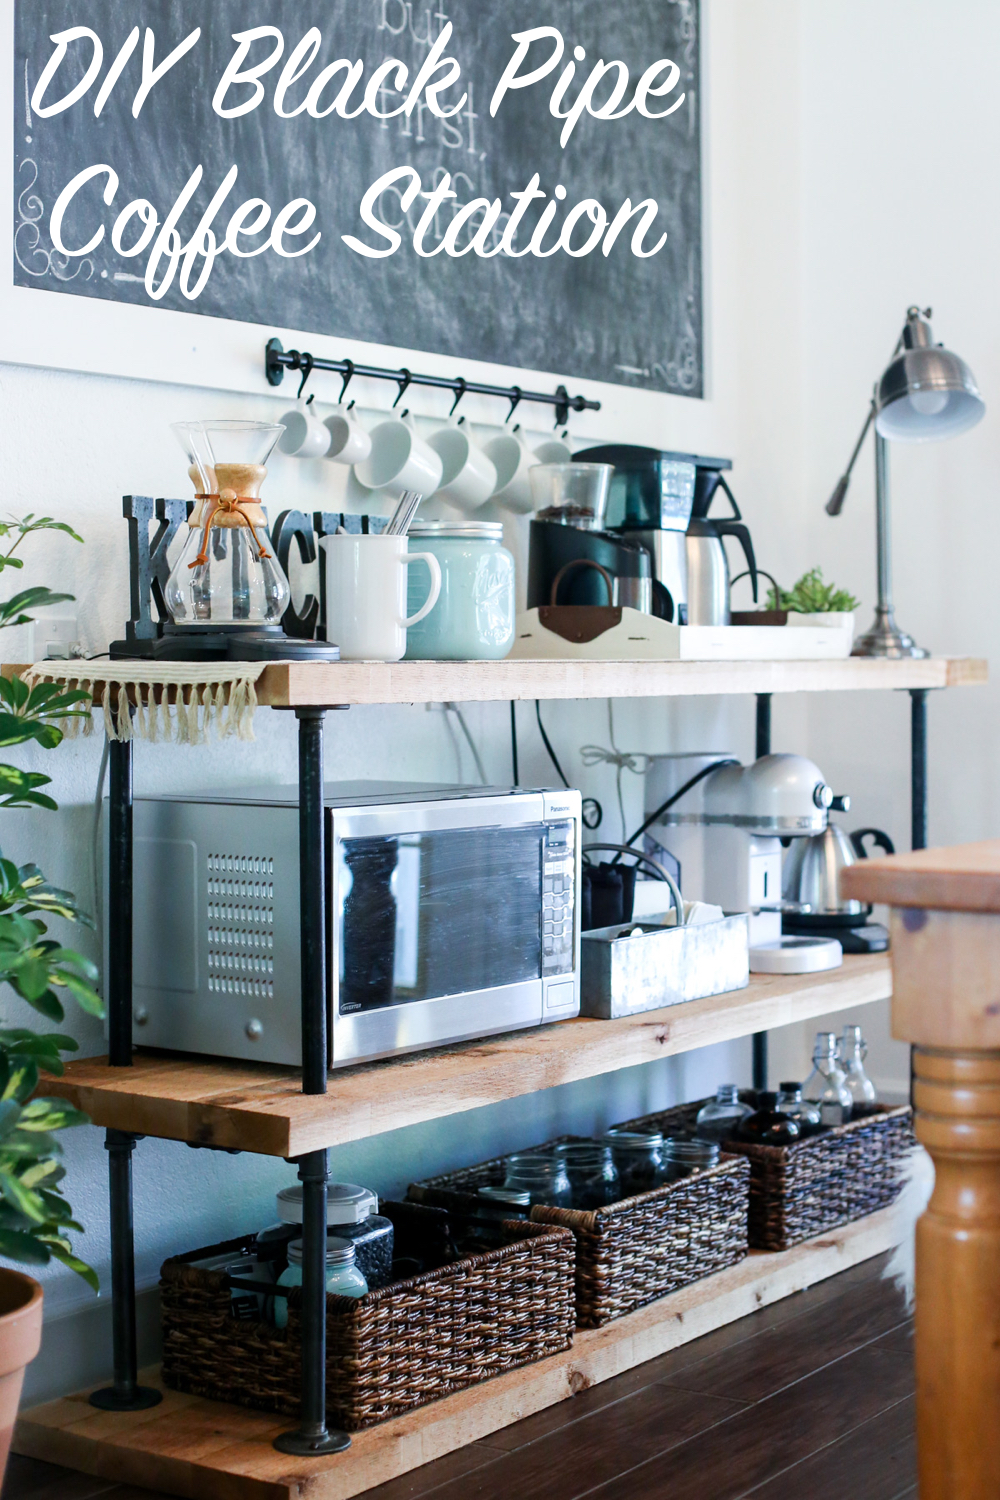 Coffee Bar Ideas: 40 Ideas For The Best Home Coffee Station - Decoholic